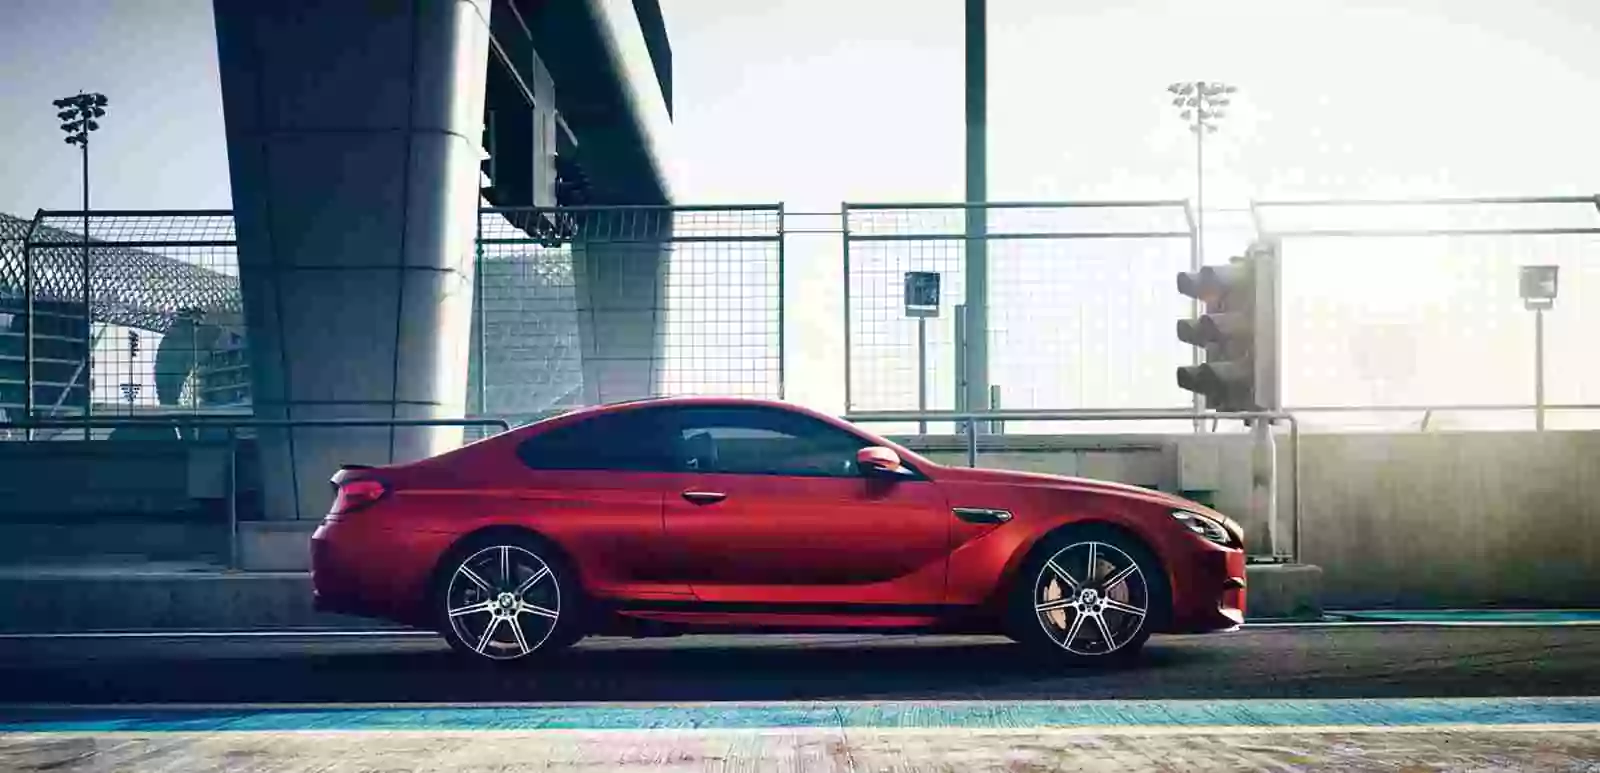 Where Can I Rent A BMW M6 In Dubai 